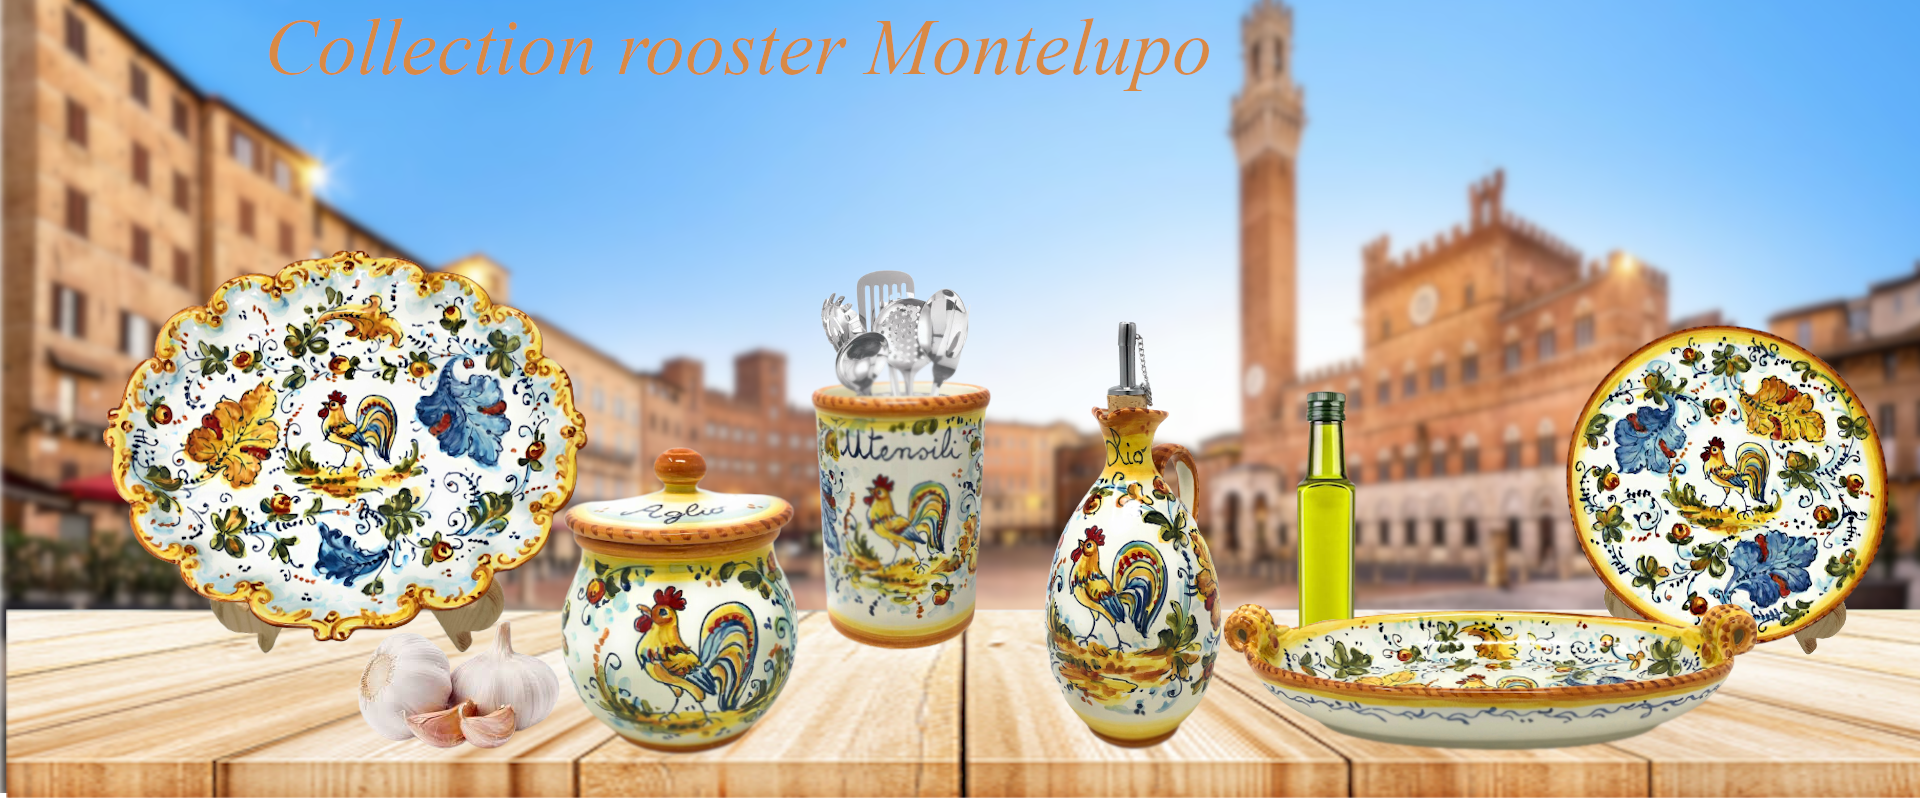 rooster Montelupo